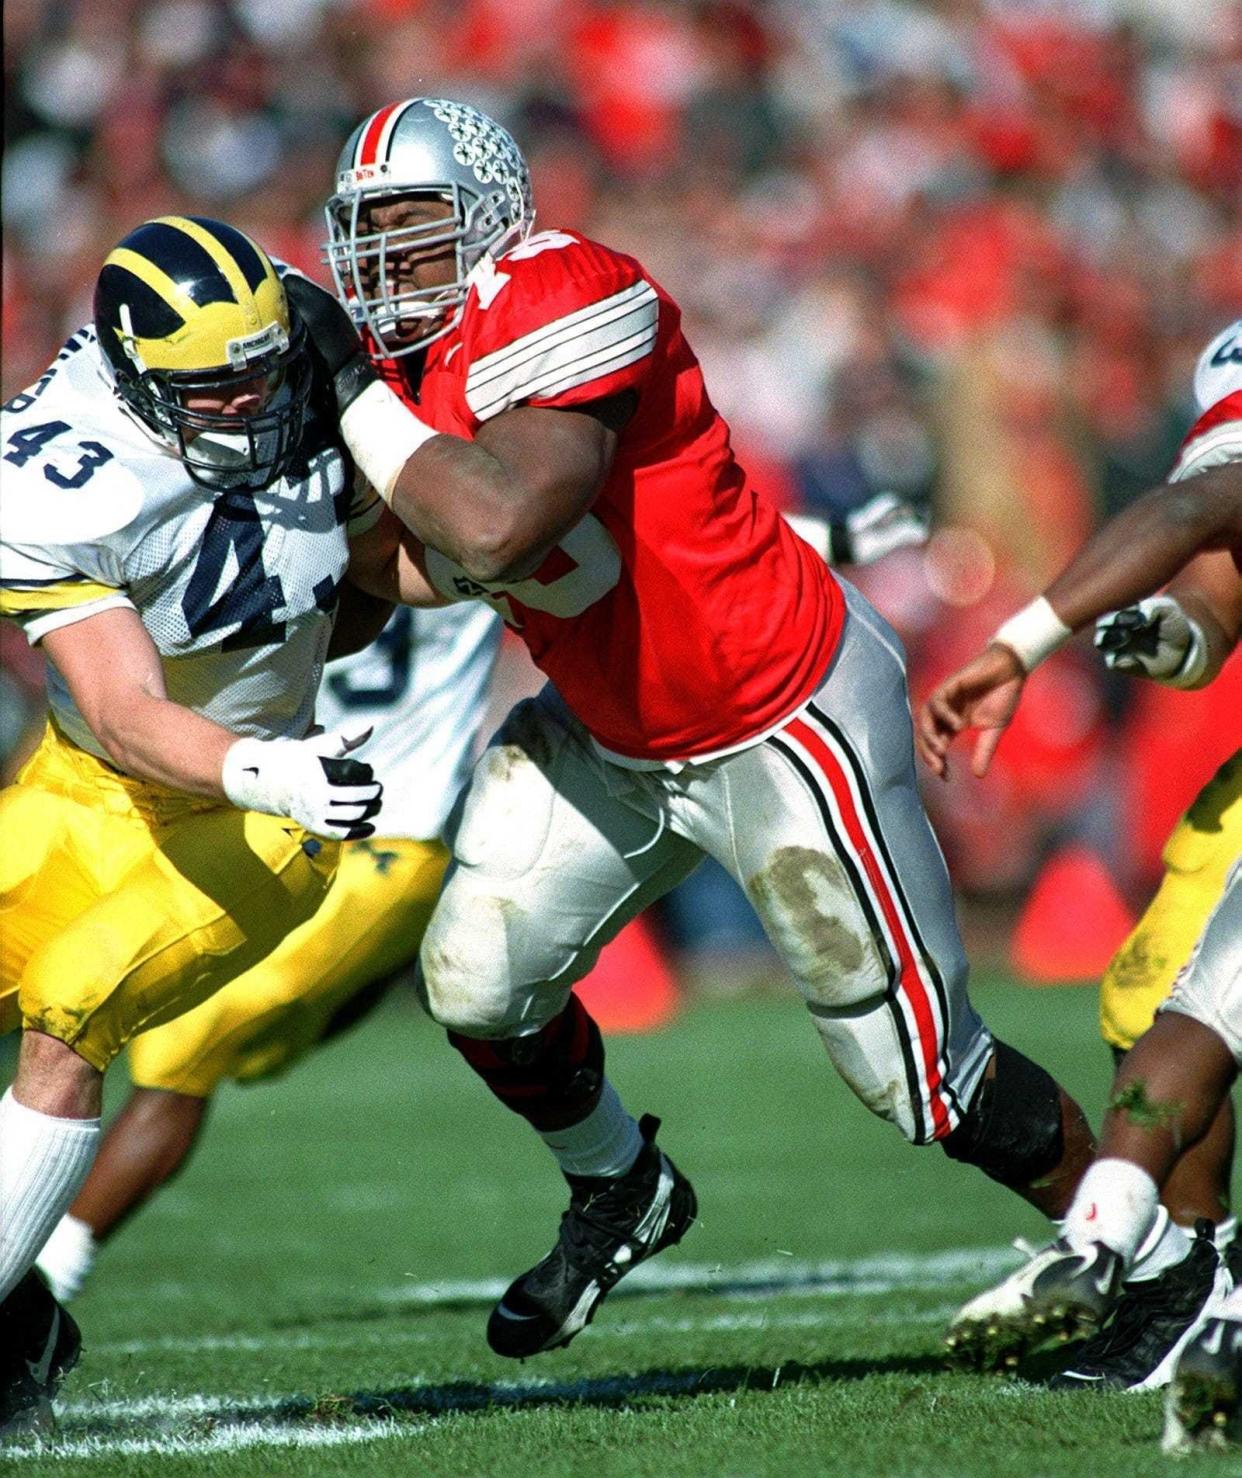 A picture of unanimity: Offensive tackle Orlando Pace was one of 11 unanimous choices among a panel of longtime observers picking the best Buckeyes of all time, by position.